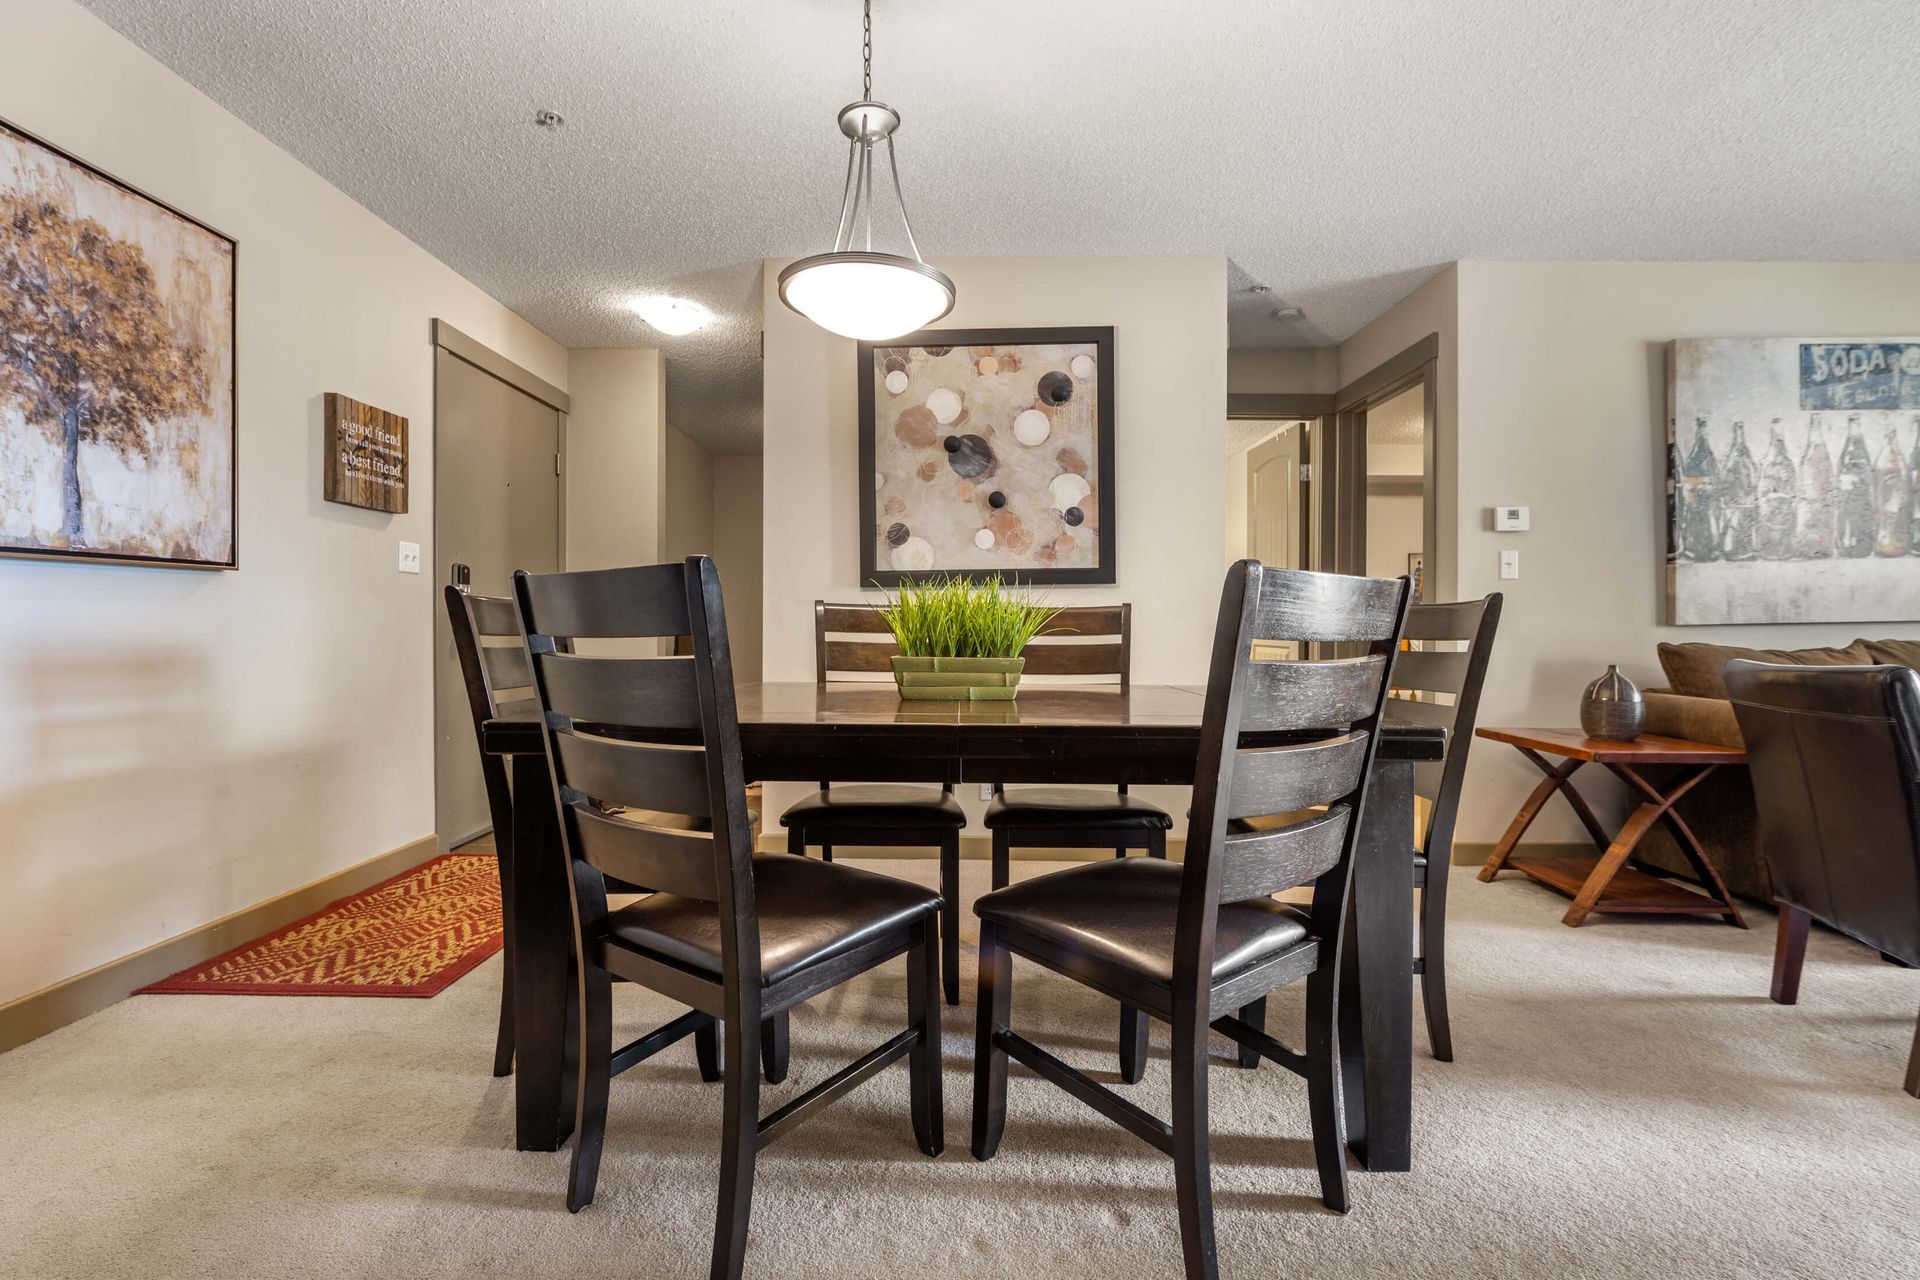 Dining area at the Lake Windermere Pointe Condos in Invermere, BC managed by Aisling Baile Property Management